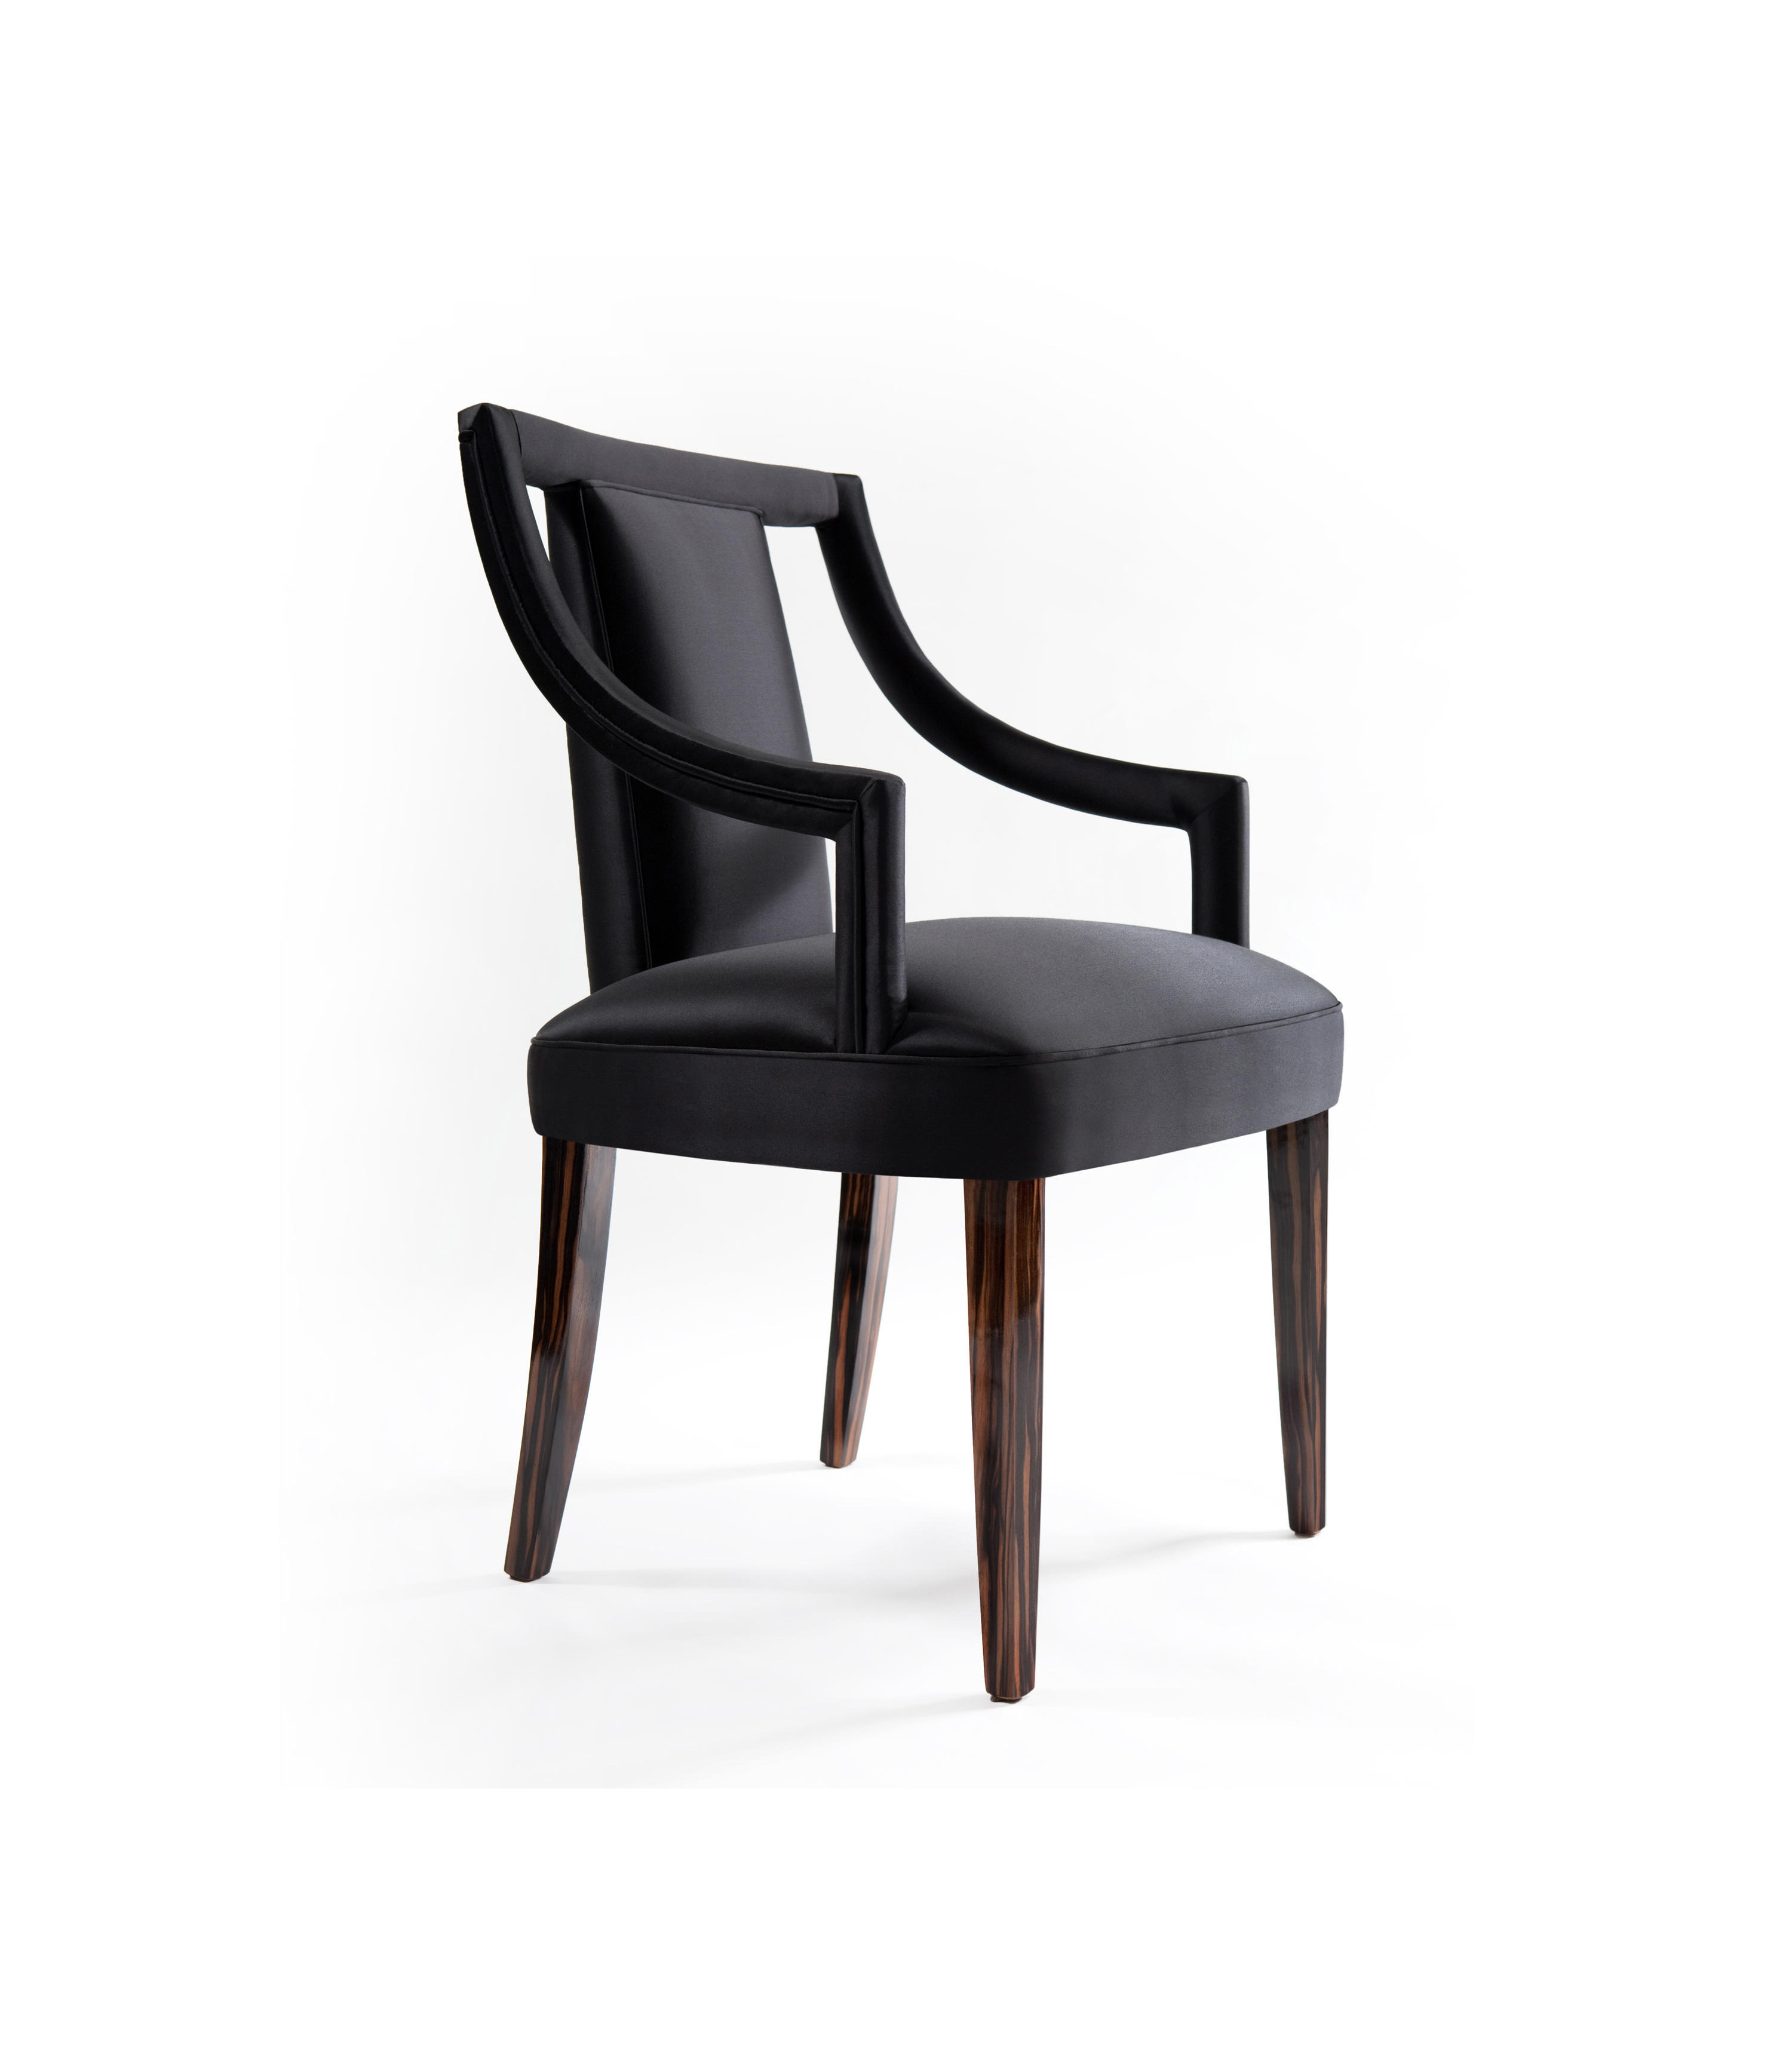 Best Classical Restaurant Dining Chairs Hotel Furniture Set Three Years Warranty wholesale